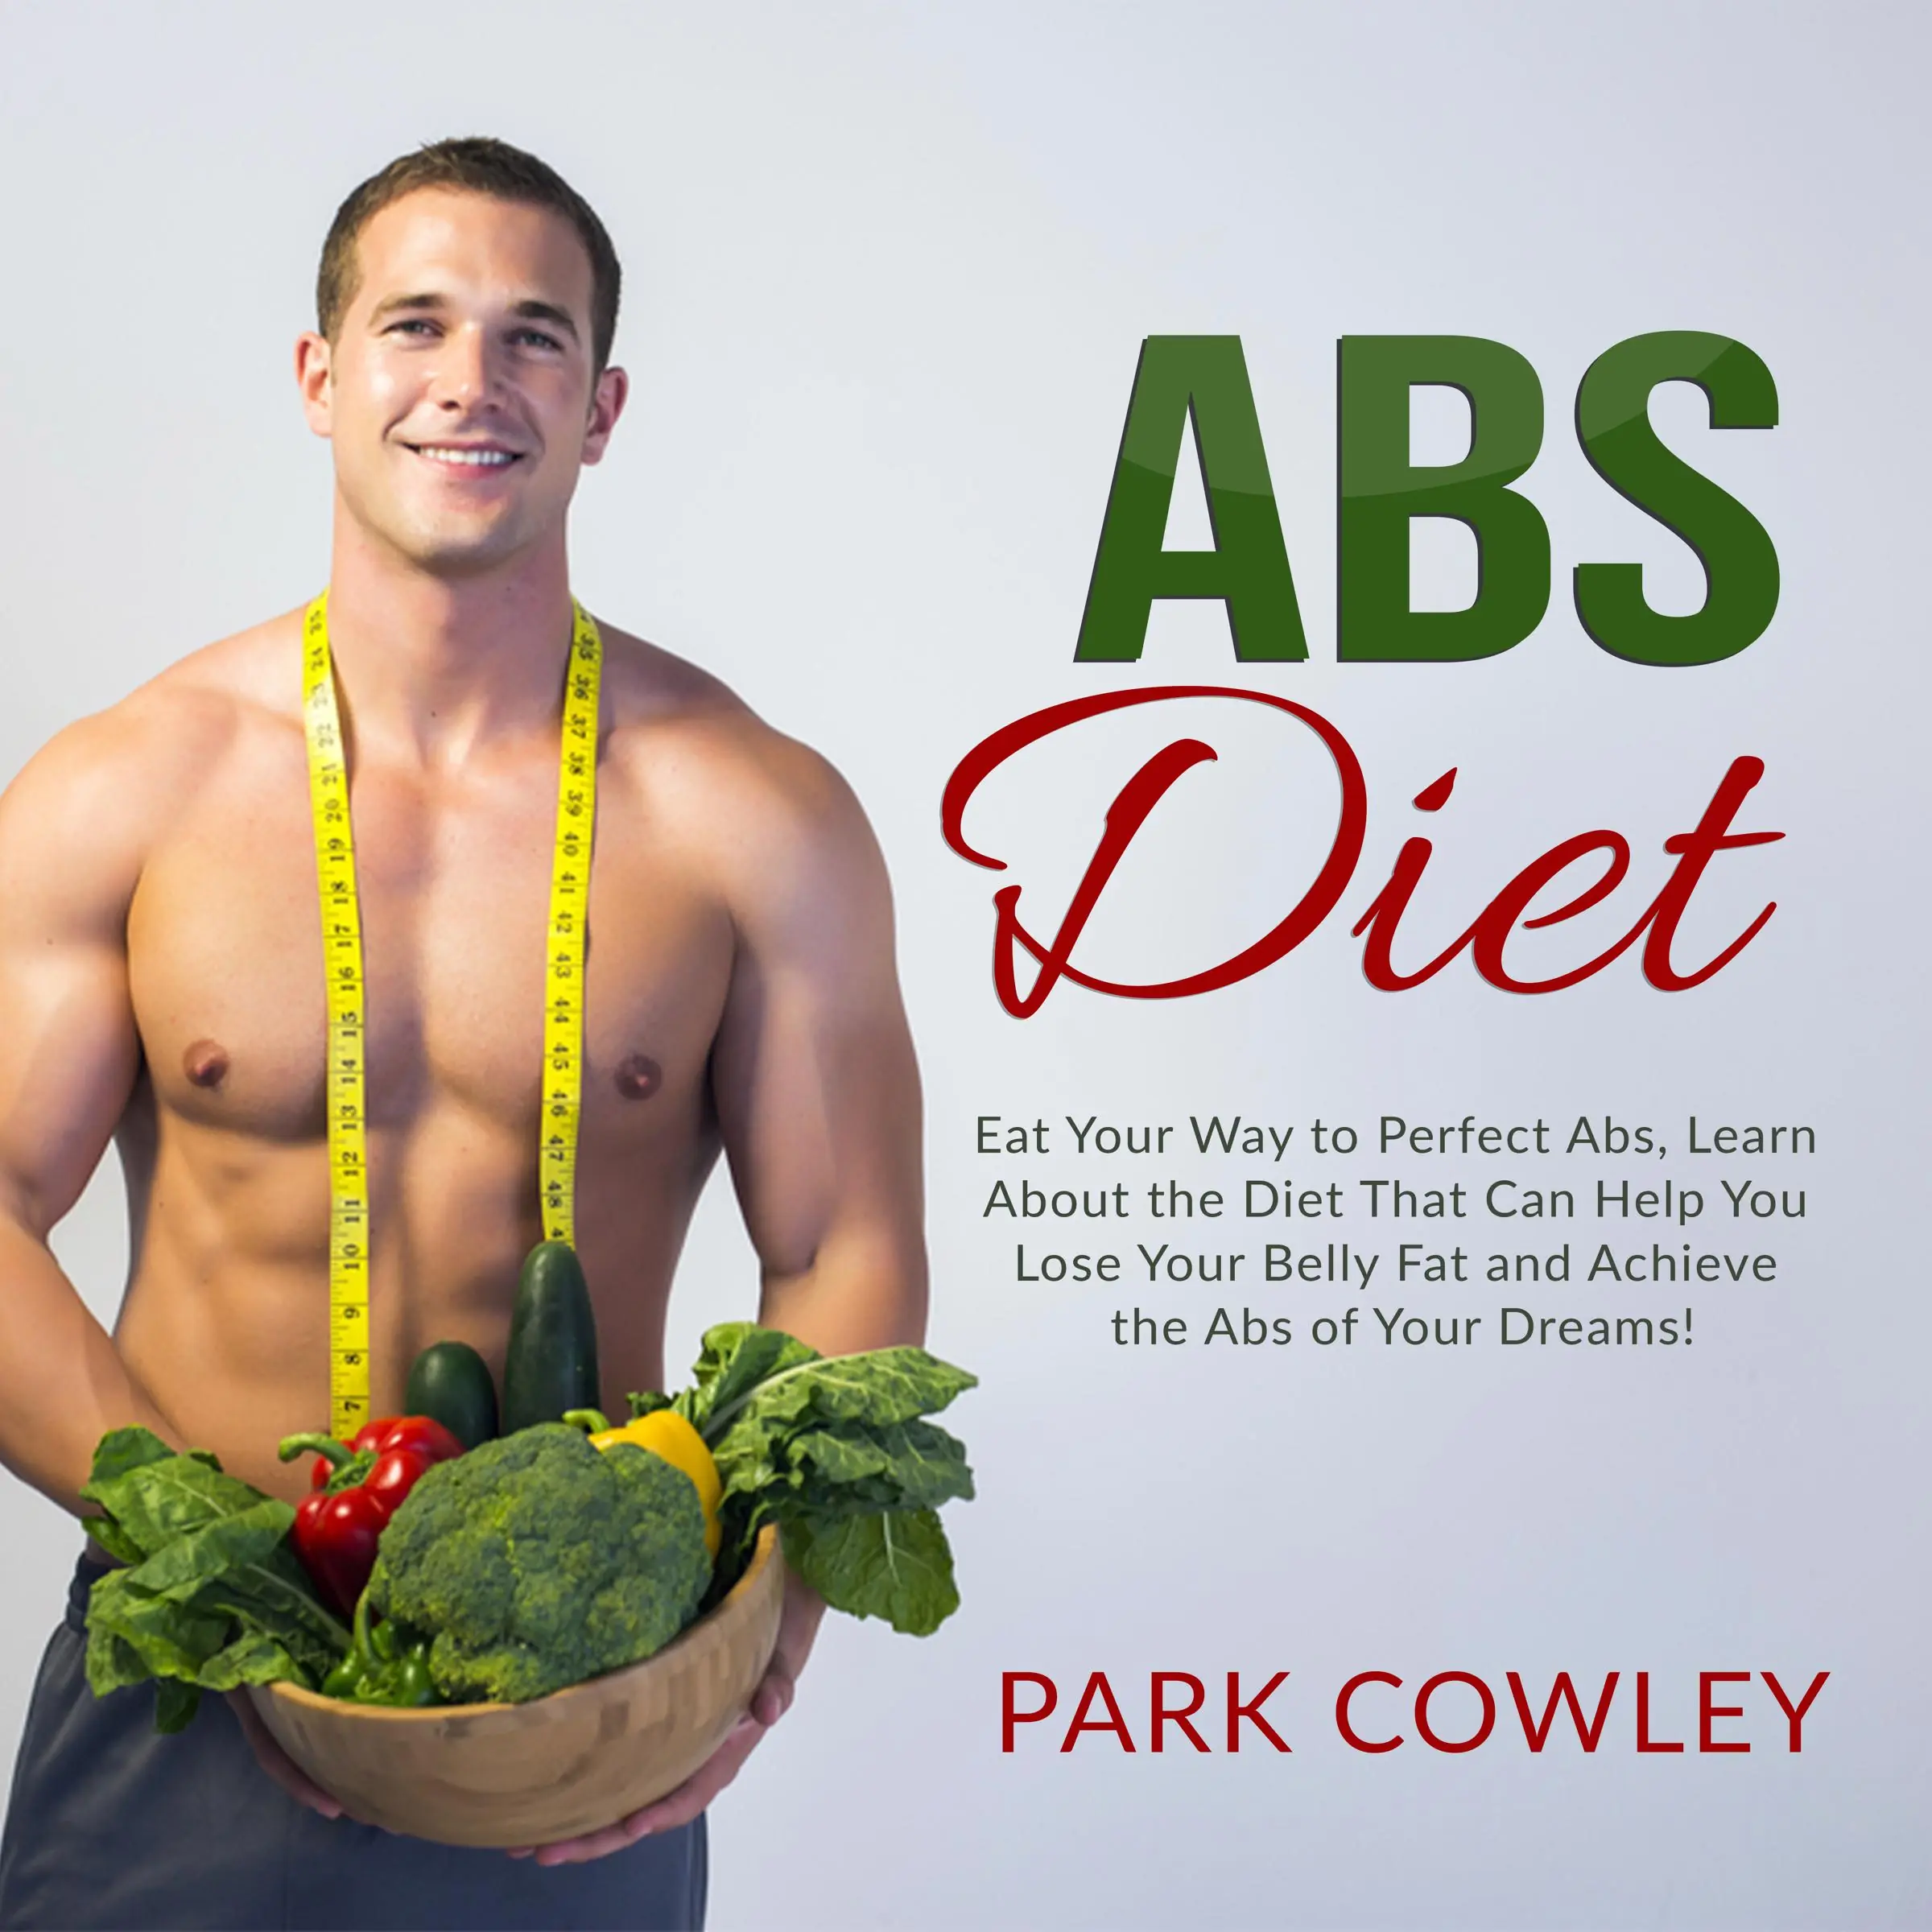 Abs Diet: Eat Your Way to Perfect Abs, Learn About the Diet That Can Help You Lose Your Belly Fat and Achieve the Abs of Your Dreams Audiobook by Park Cowley